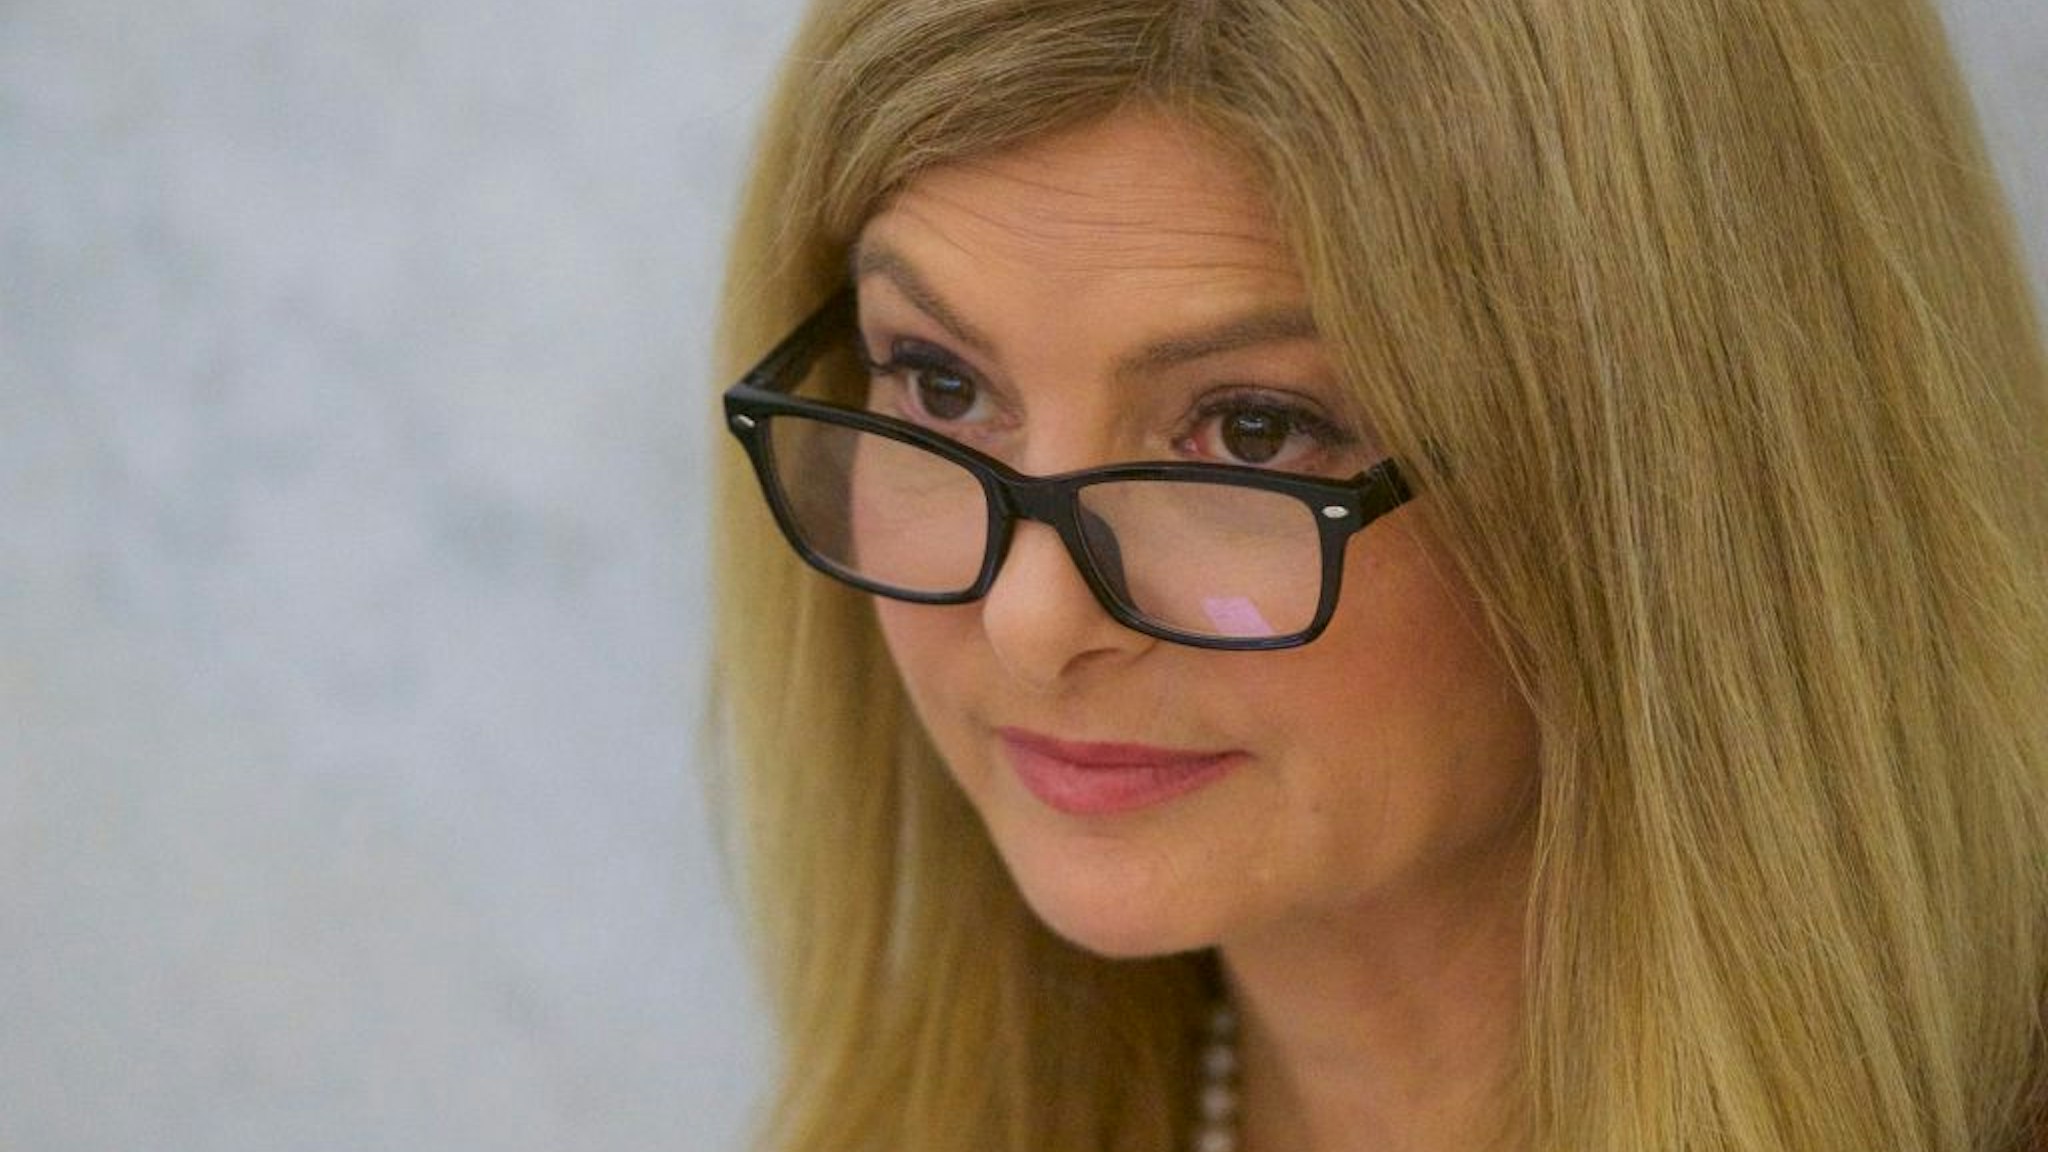 NORRISTOWN, PA - APRIL 12: Attorney Lisa Bloom arrives at the Montgomery County Courthouse during the fourth day of Bill Cosby's sexual assault retrial on April 12, 2018 in Norristown, Pennsylvania. A former Temple University employee alleges that the entertainer drugged and molested her in 2004 at his home in suburban Philadelphia. More than 40 women have accused the 80 year old entertainer of sexual assault.